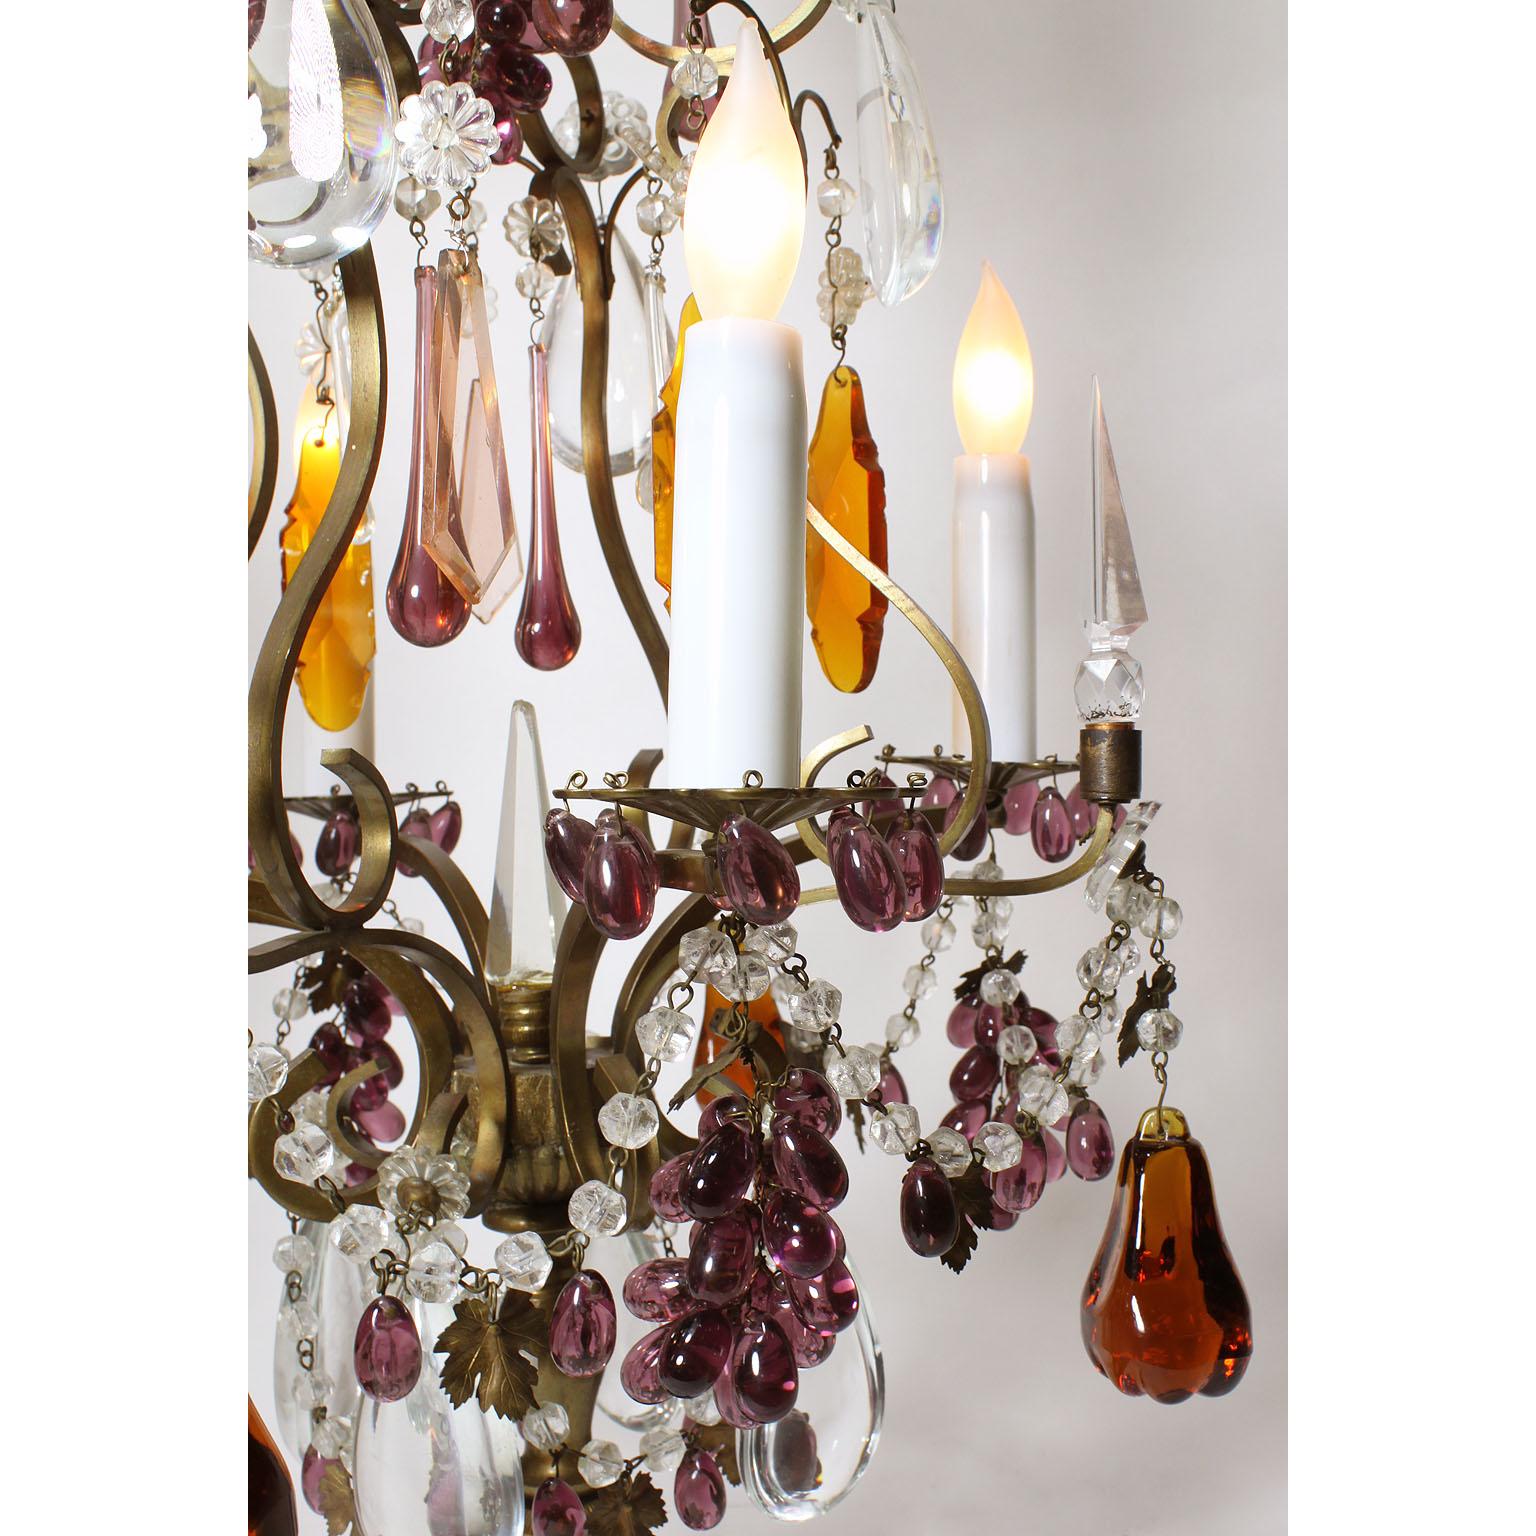 Patinated Pair of 19th-20th Century Florentine Cut-Glass Fruit Girandole Table Lamps For Sale